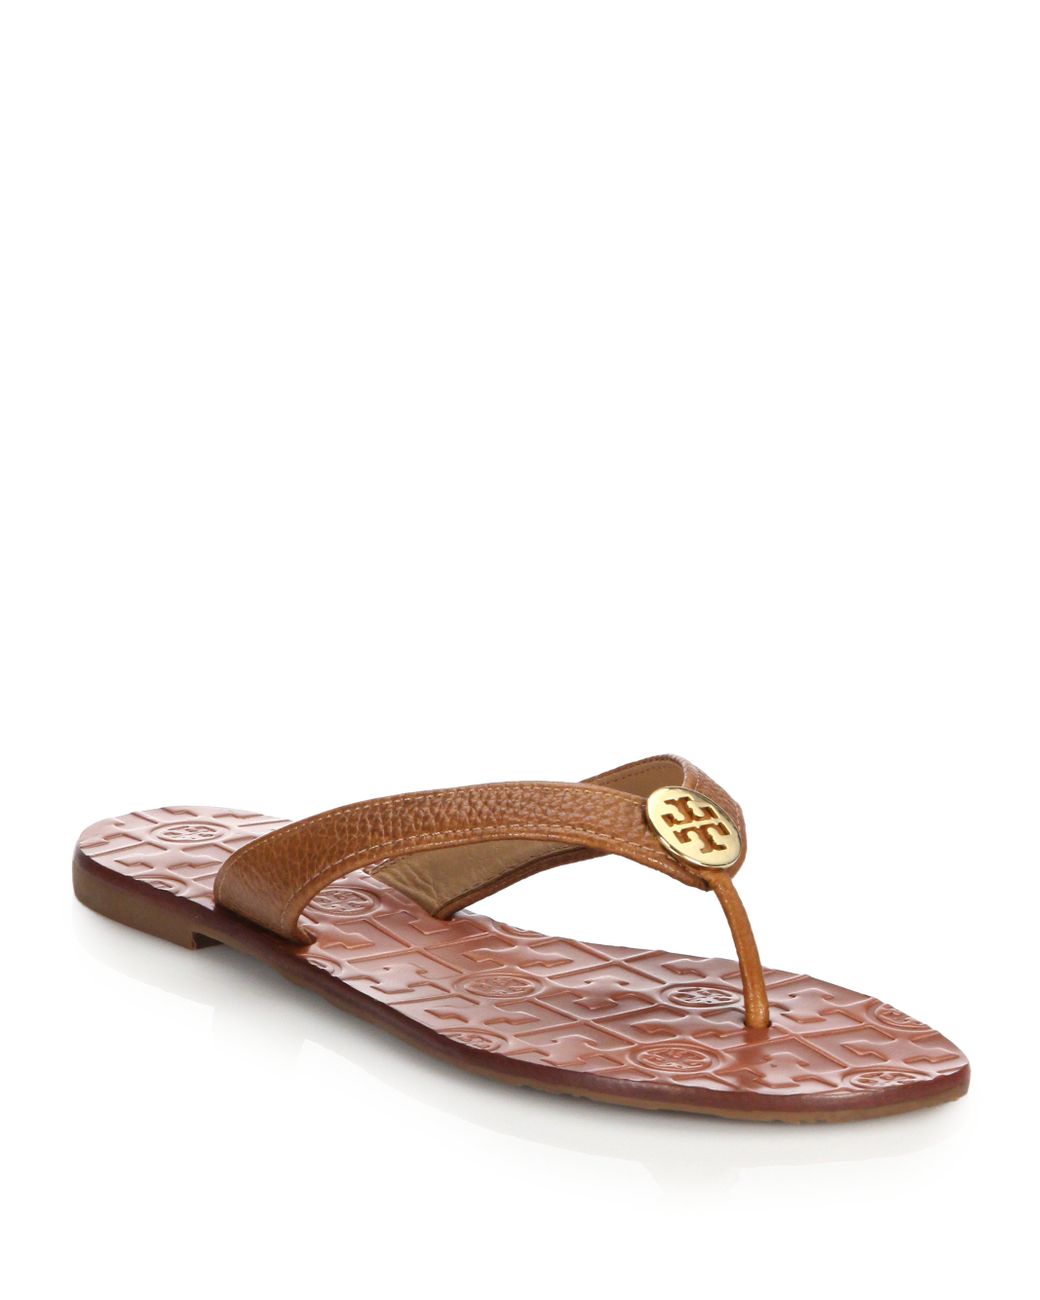 Tory Burch Thora Tumbled Leather Thong Sandals in Brown | Lyst